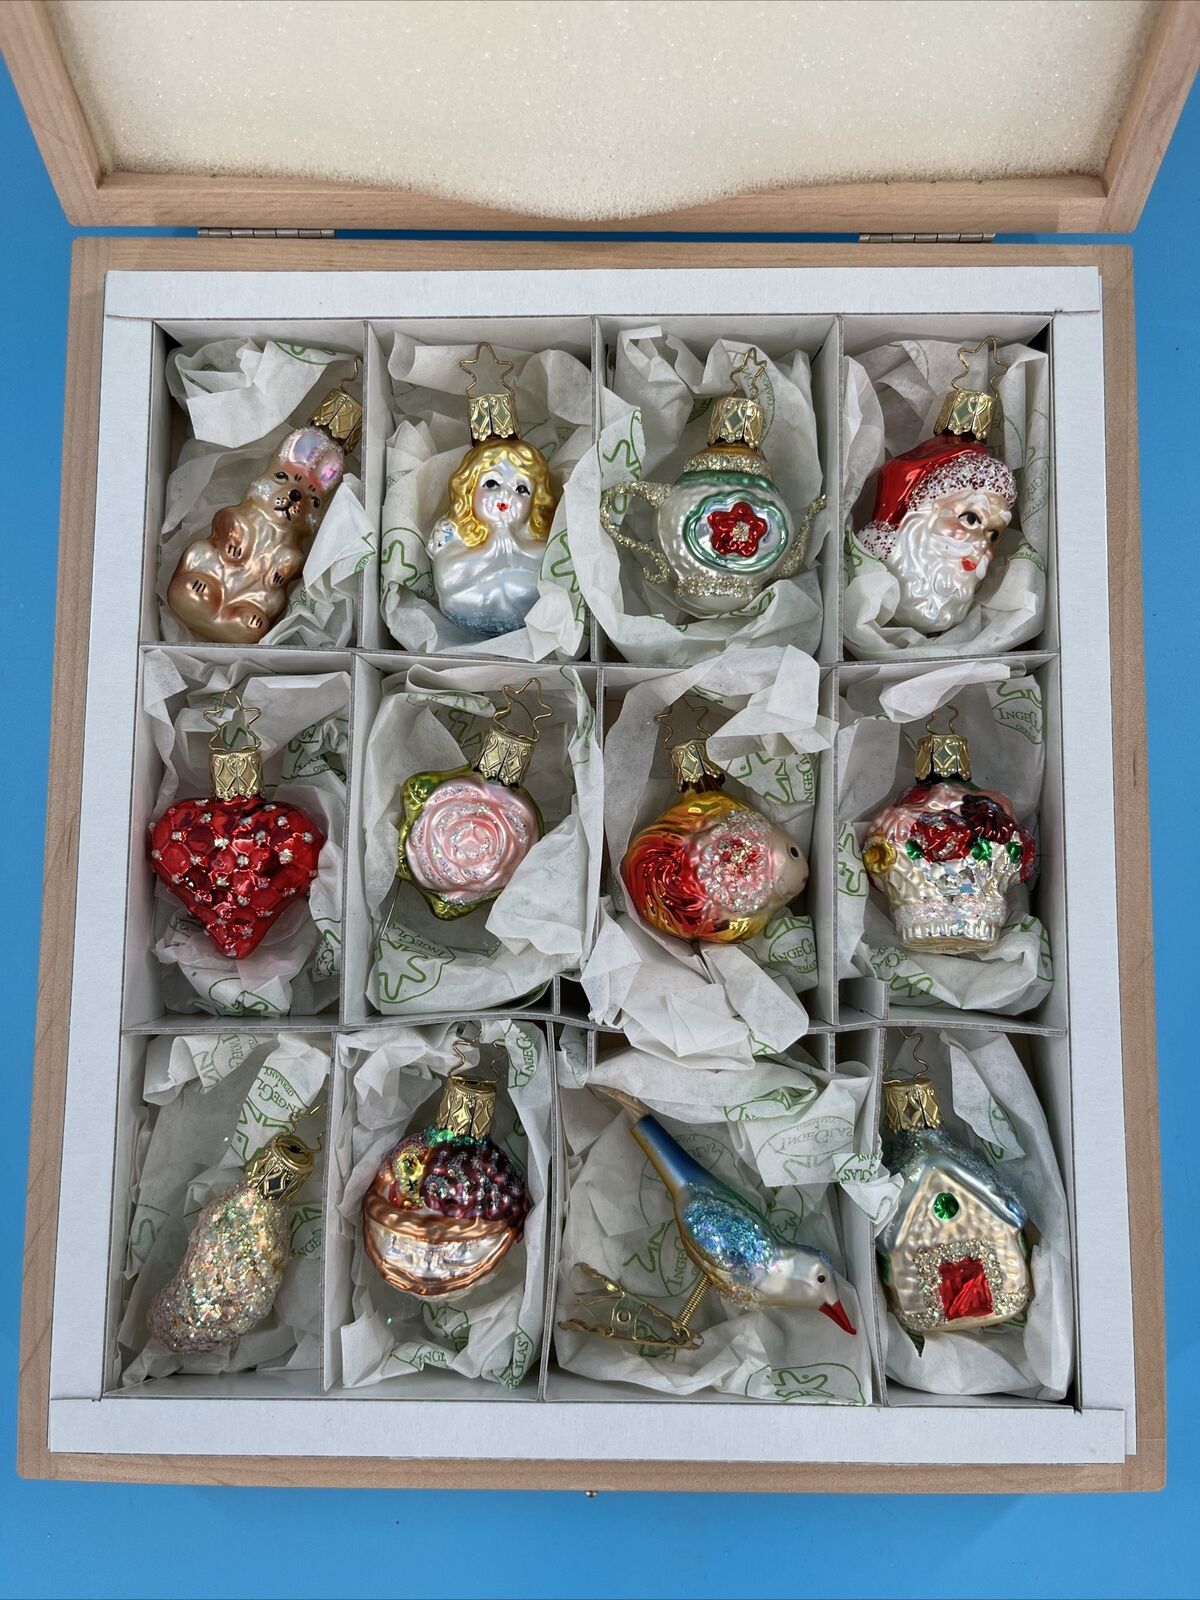 Inge-Glas Christmas Ornaments Miniatures The Bridal Collection Set Germany